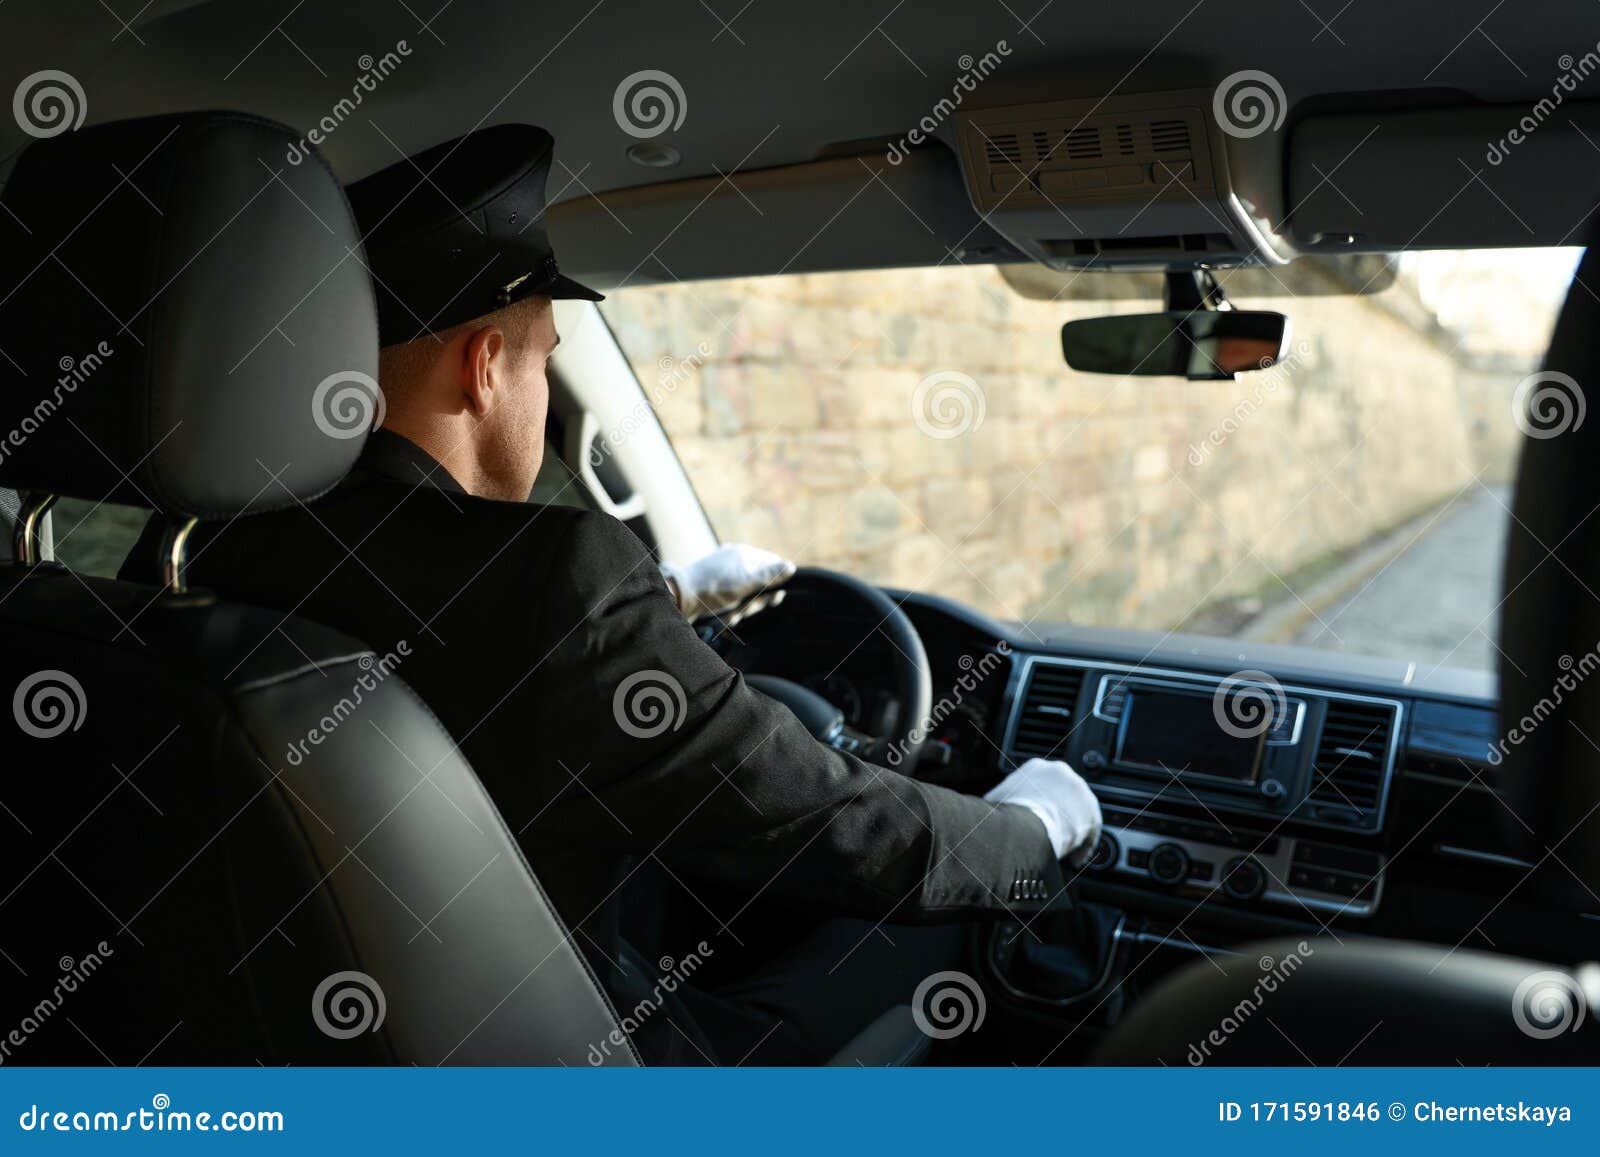 Professional Driver In Car. Chauffeur Service Stock Photo